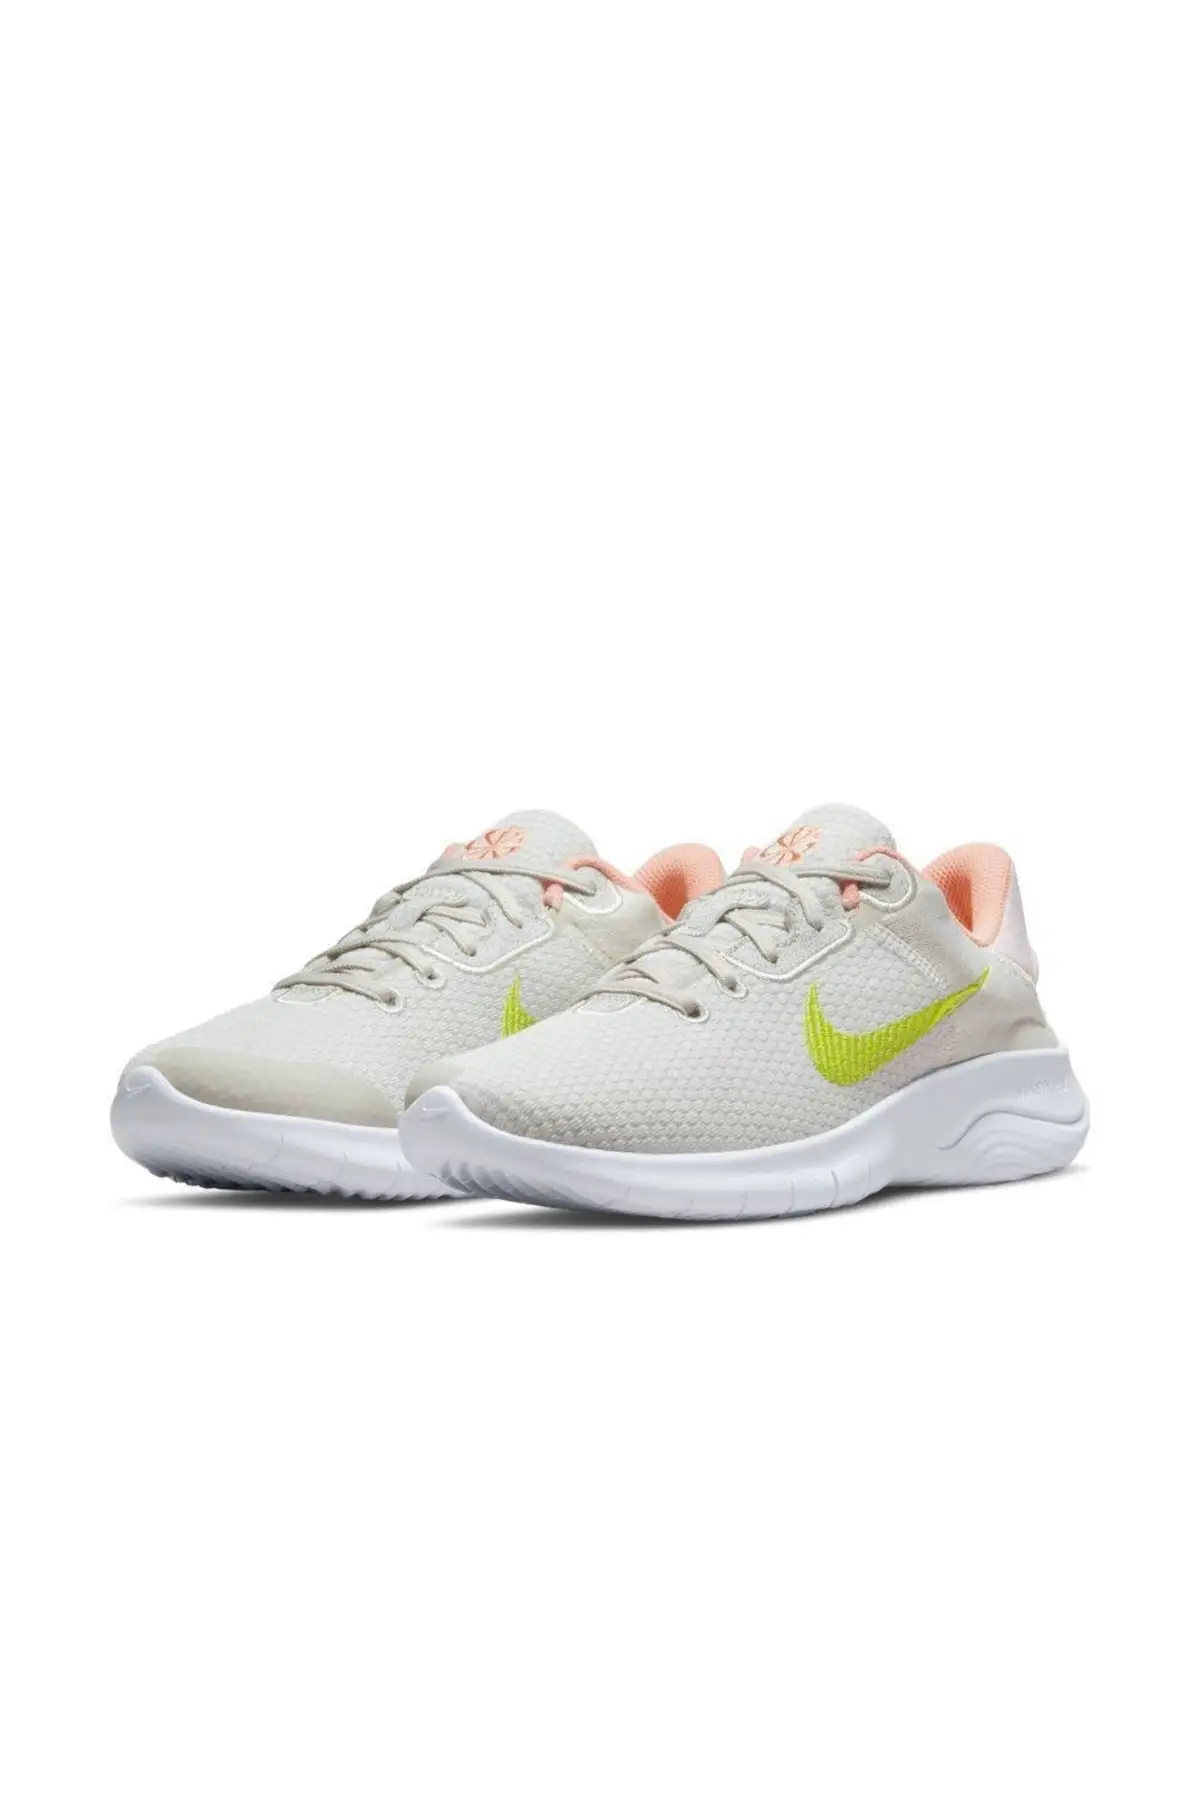 Unleash Your Potential with Women’s Nike Flex Shoes插图3